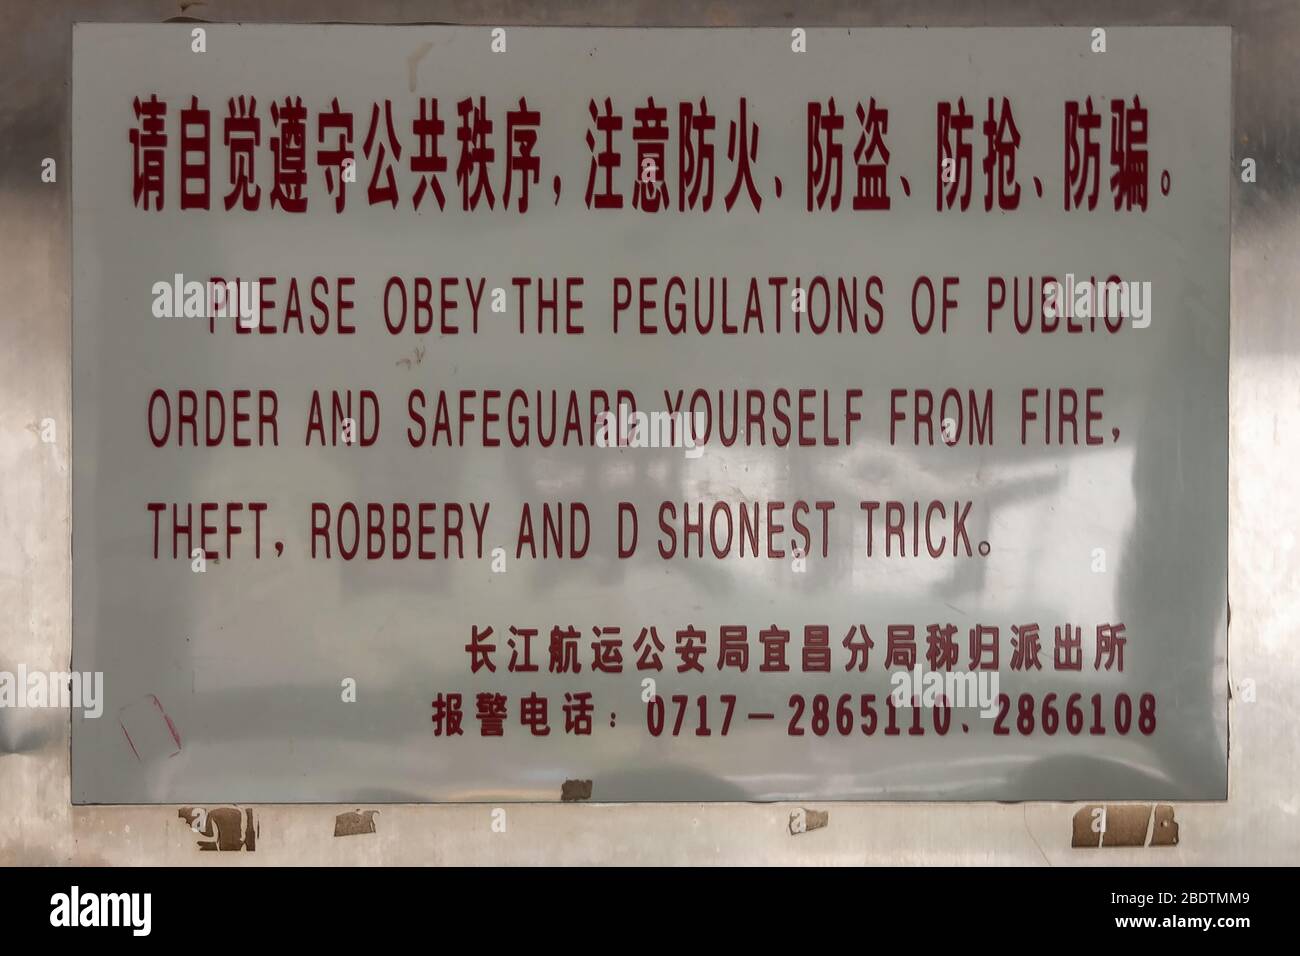 Three Gorges Dam, China - May 6, 2010: Yangtze River. Warning sigh with red letters on white and spelling errors that are kind of funny. Stock Photo